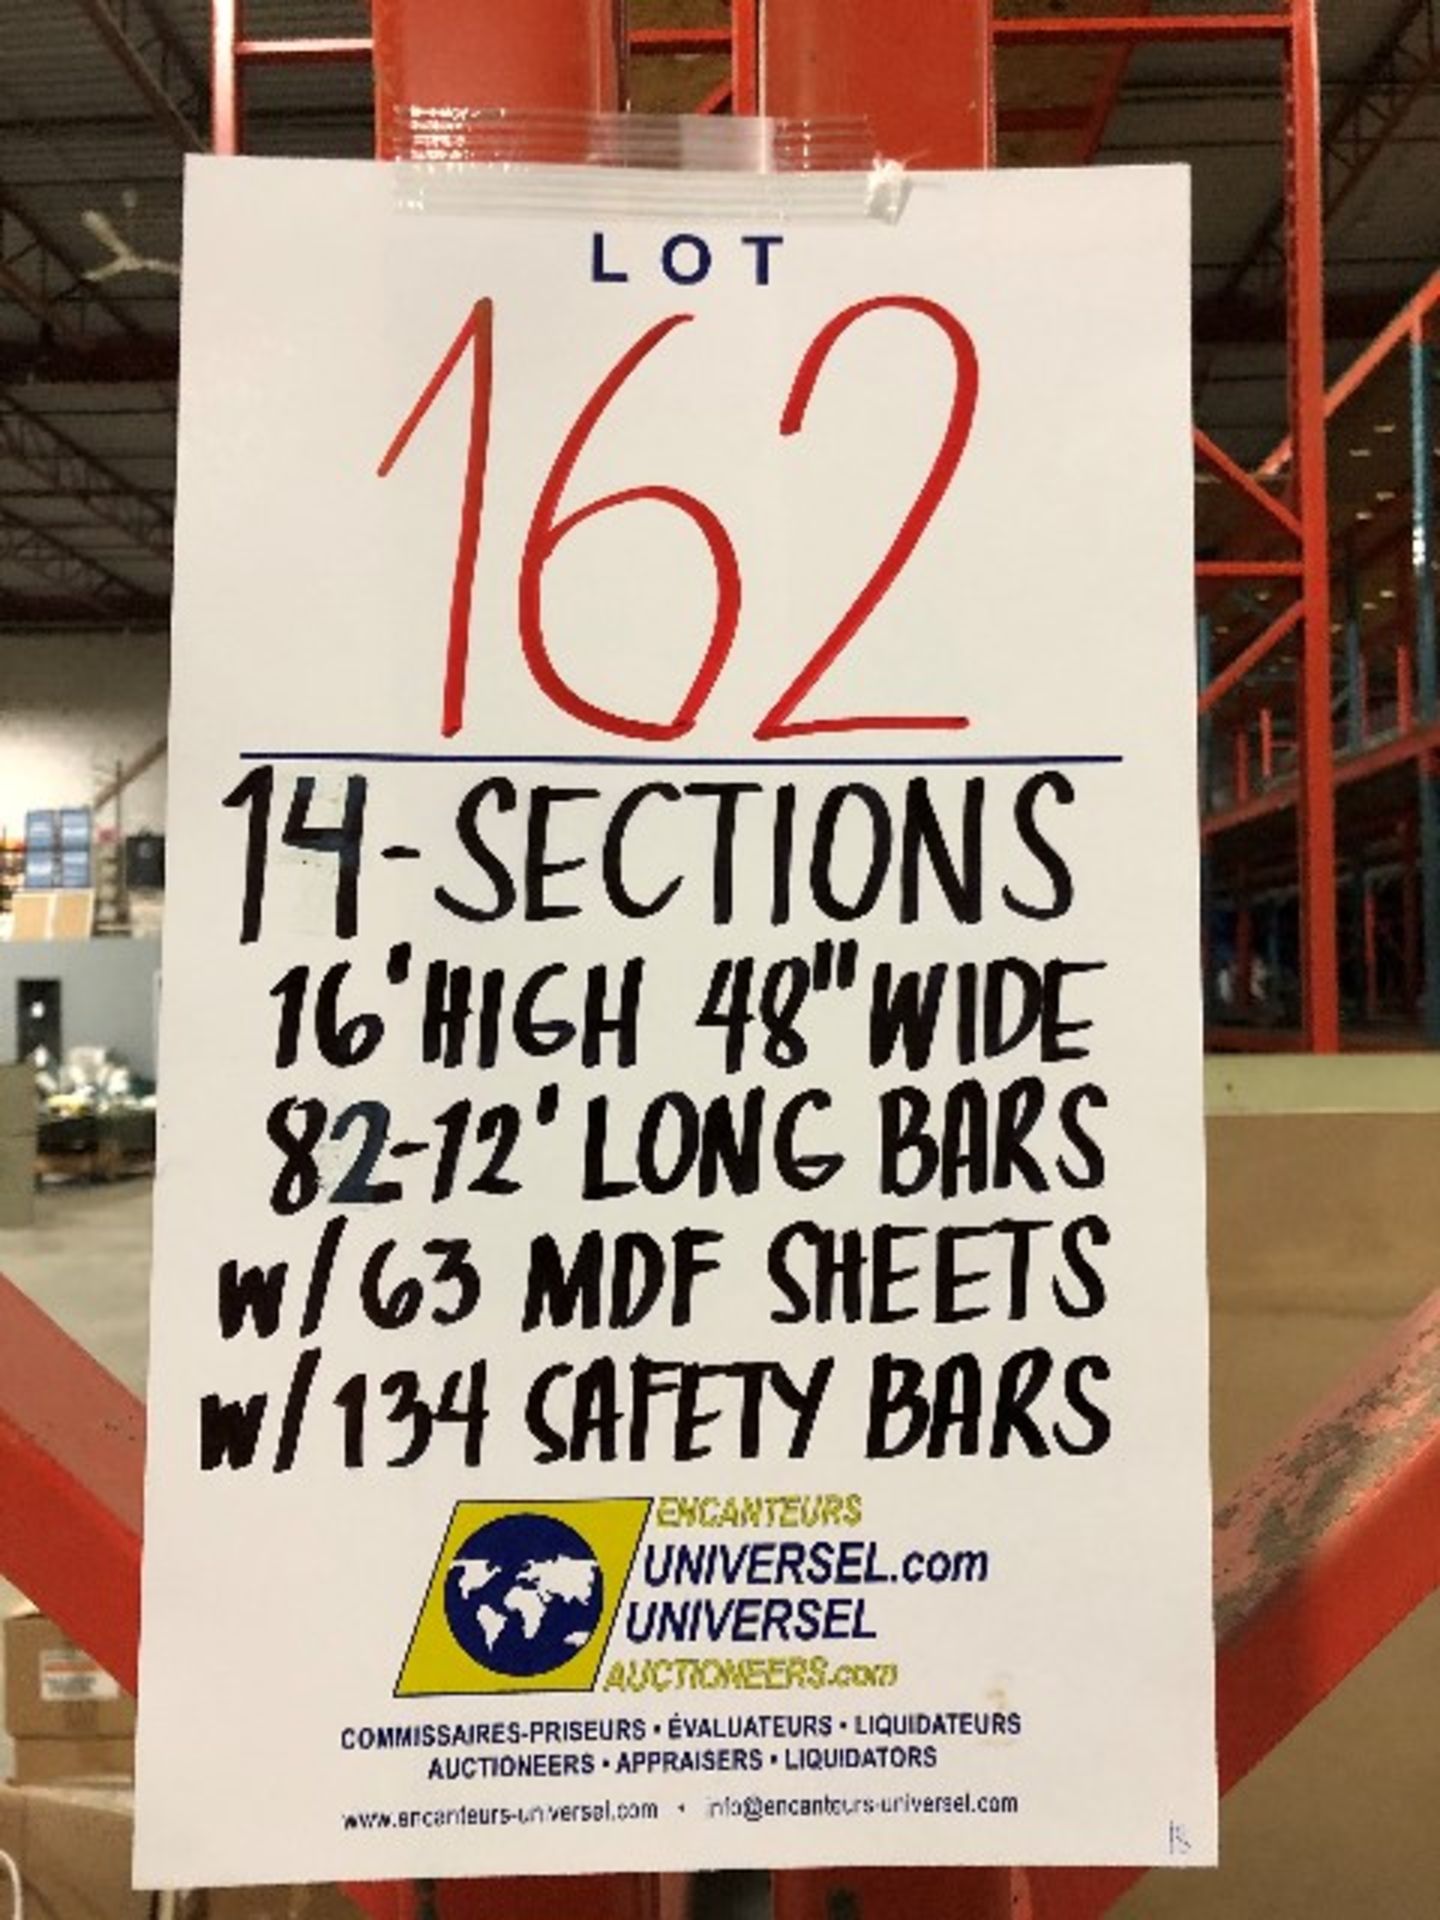 Pallet racking: H.16'xW.48”,82pcs 12'long bars w/63 MDF sheets & 134pcs safety bars,14 sections - Image 3 of 3